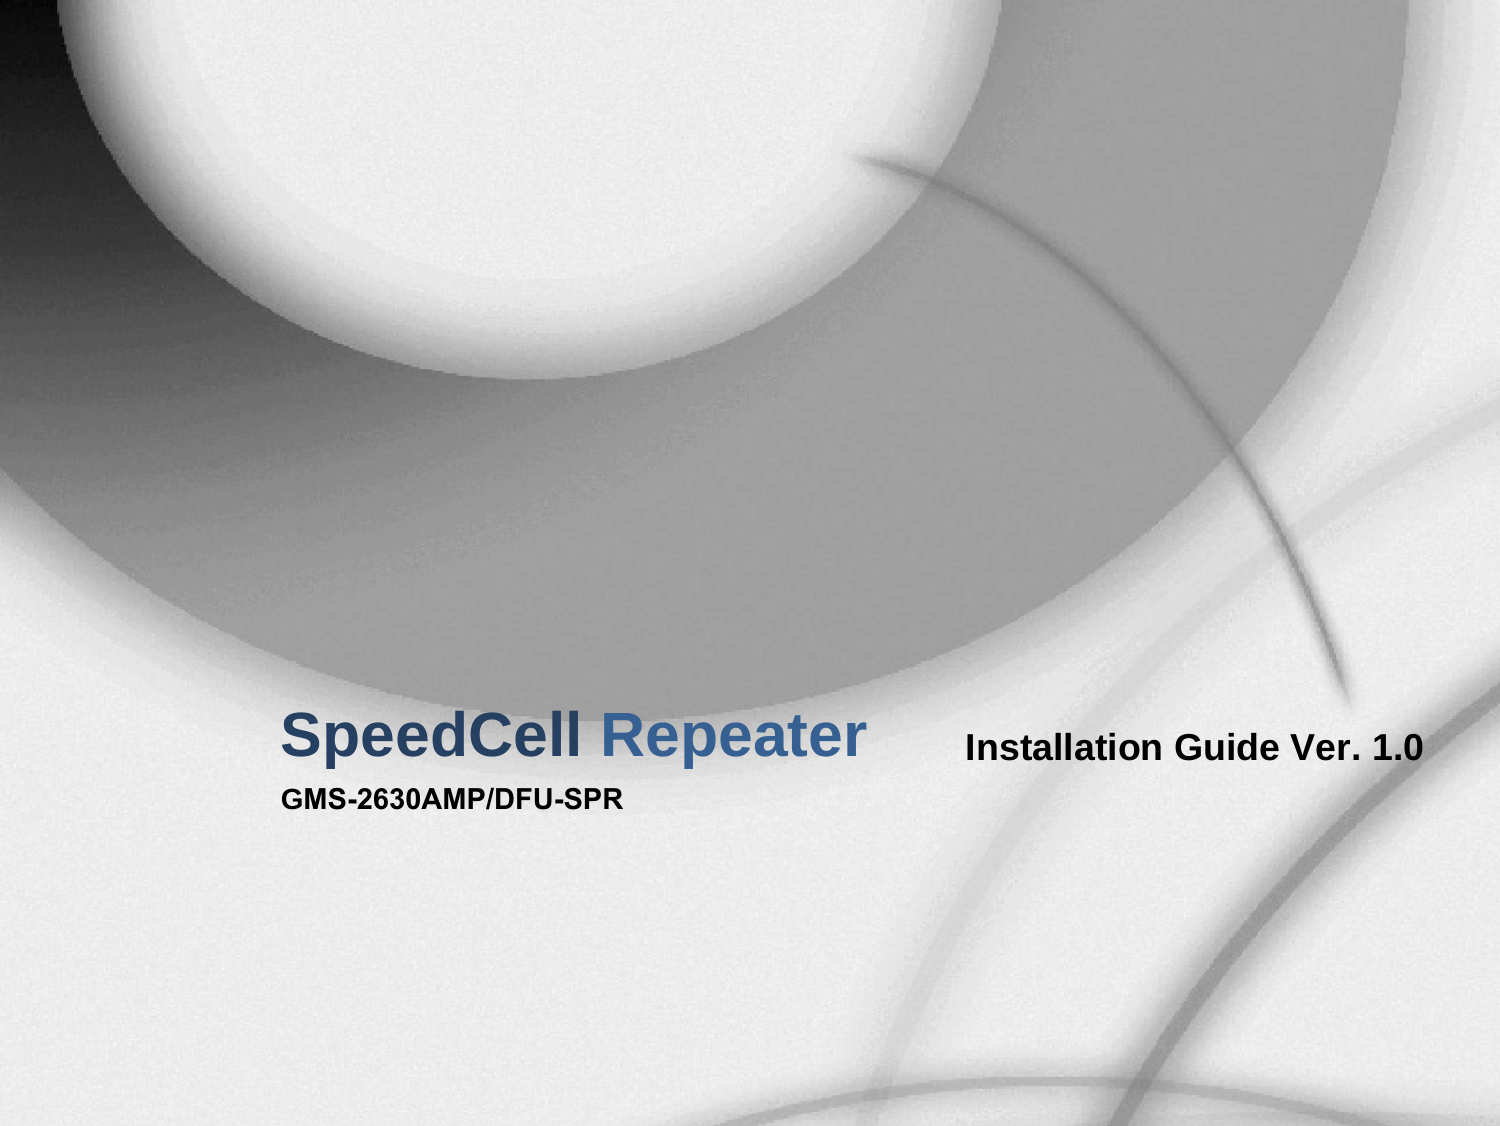 Version 1.0 * May 2011SpeedCell Repeater  Installation Guide Ver. 1.0GMS-2630AMP/DFU-SPR